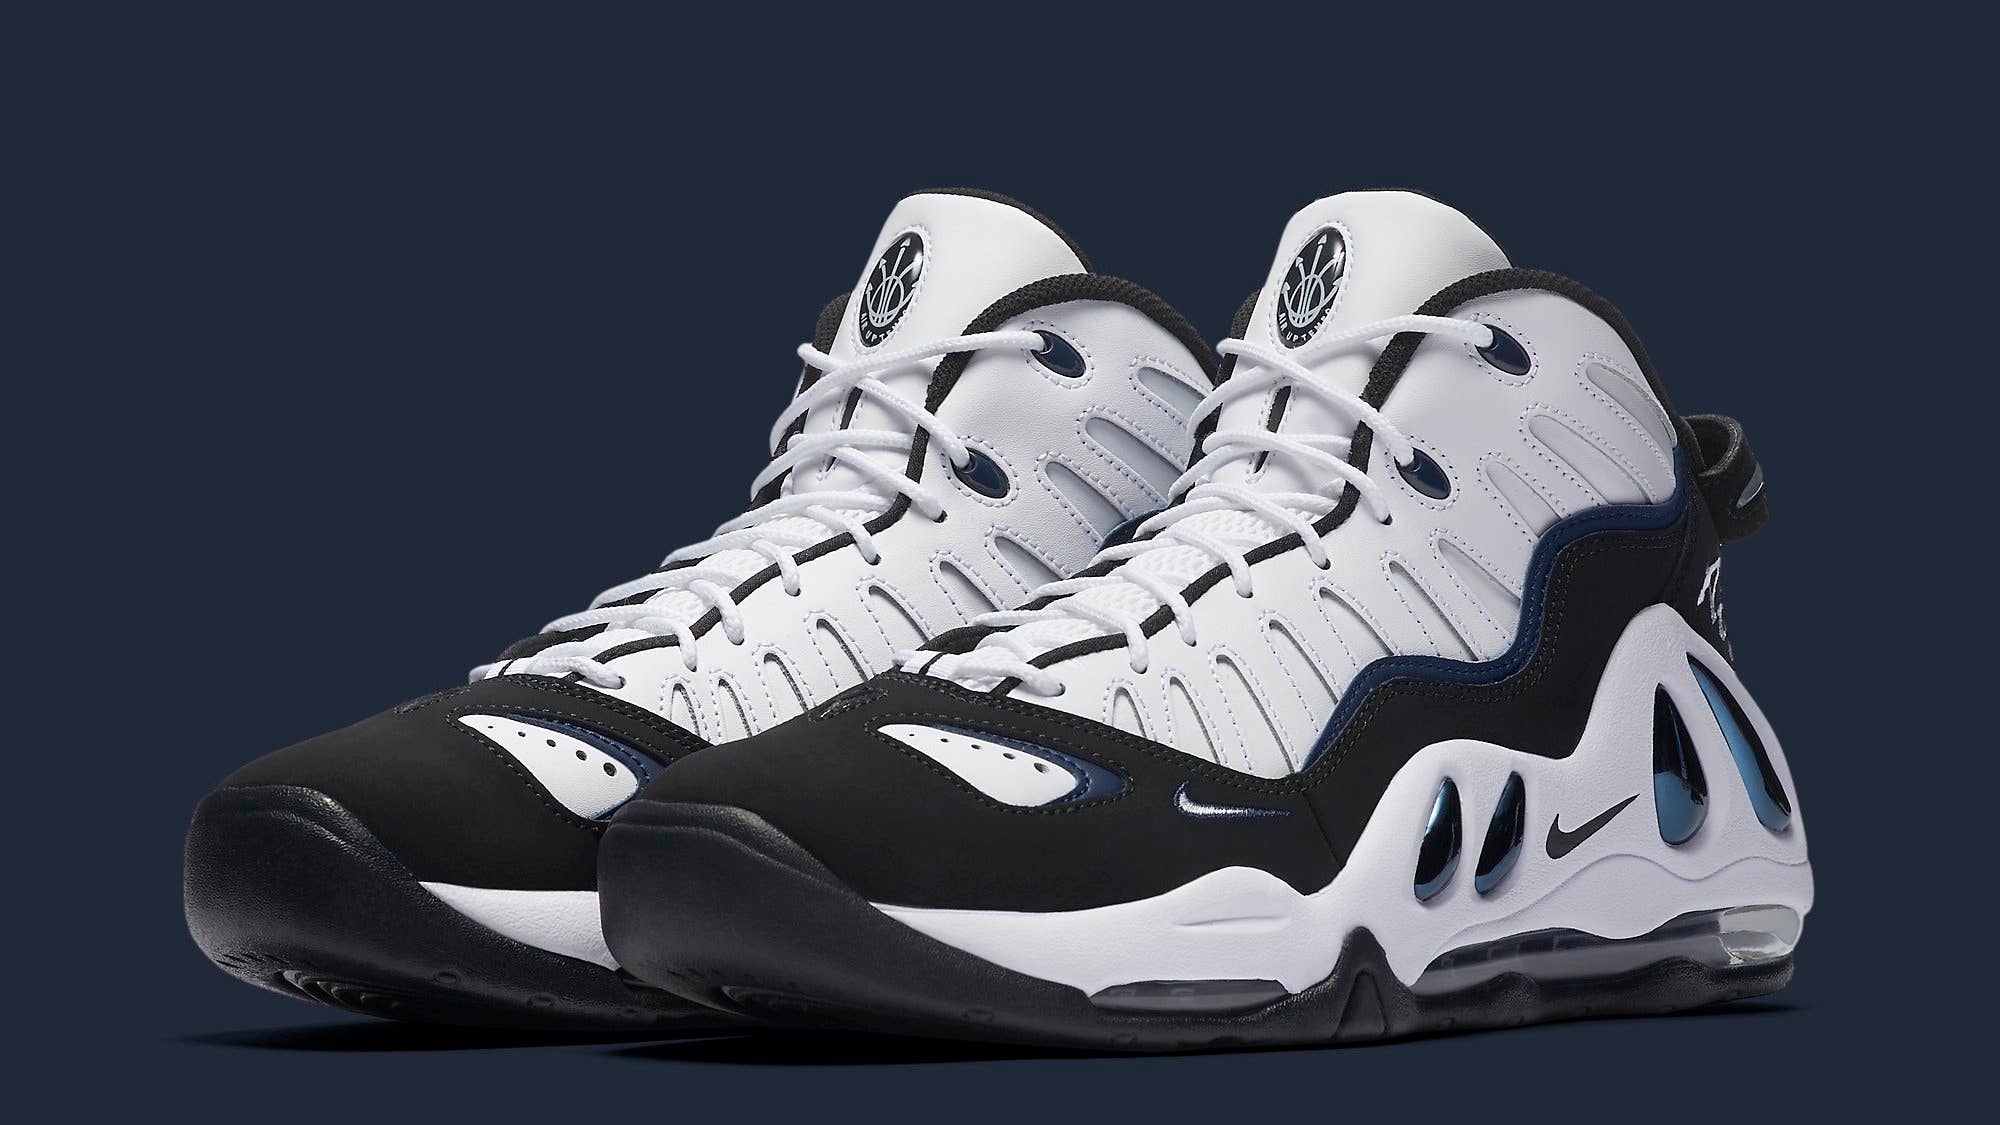 nike air max uptempo 97 college navy 399207 101 release date pair